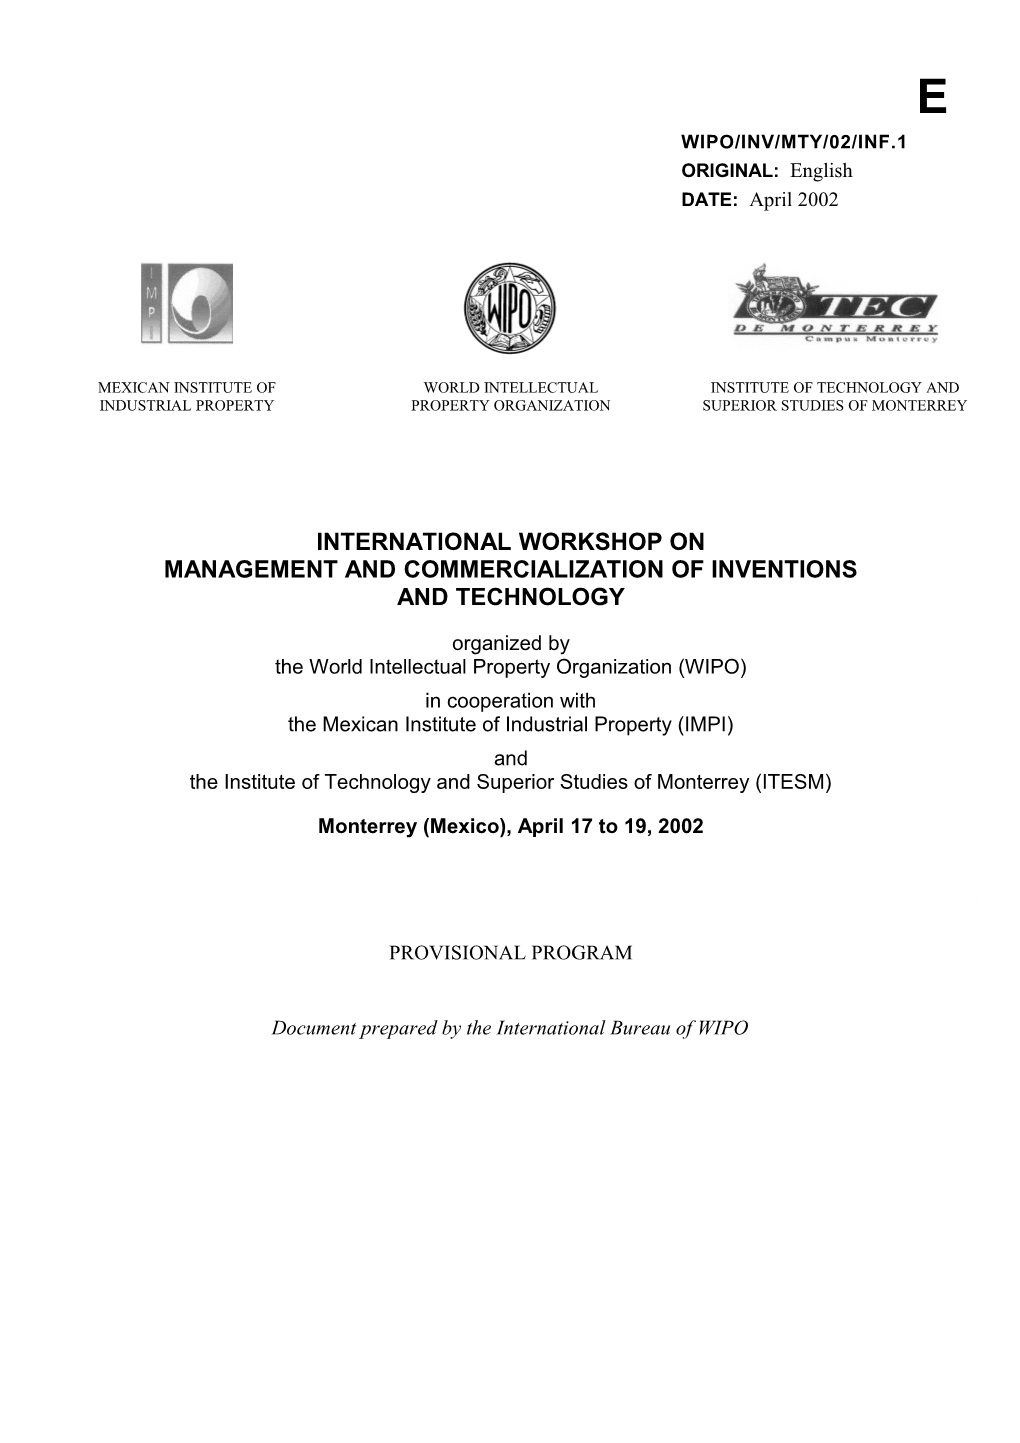 WIPO/INV/MTY/02/INF/1: Provisional Program